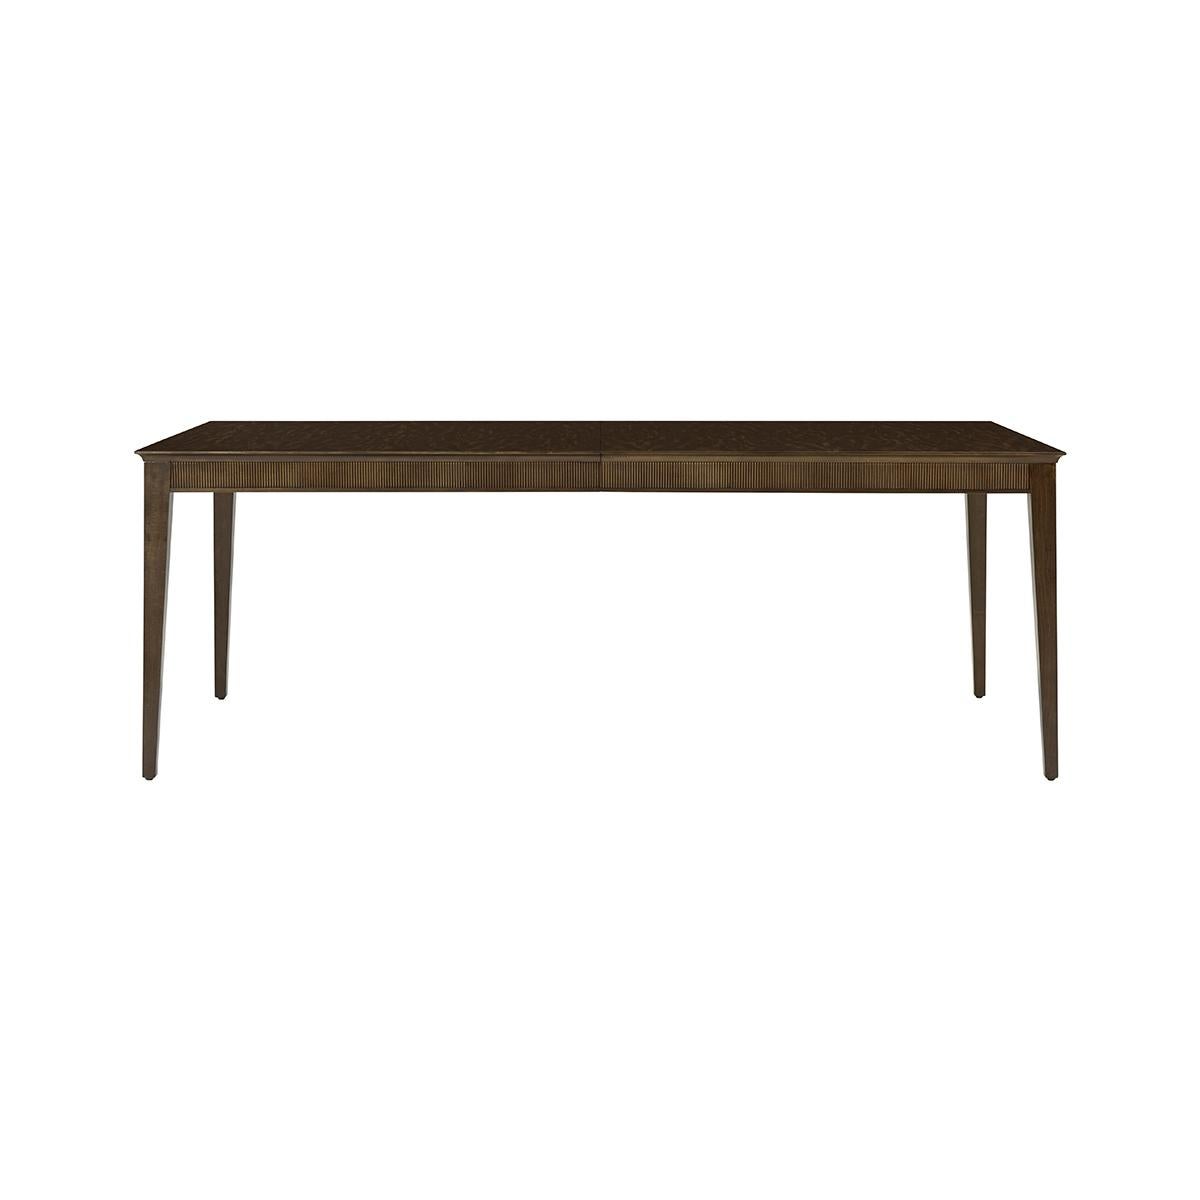 Vietnamese Mid Century Rectangular Dining Table For Sale